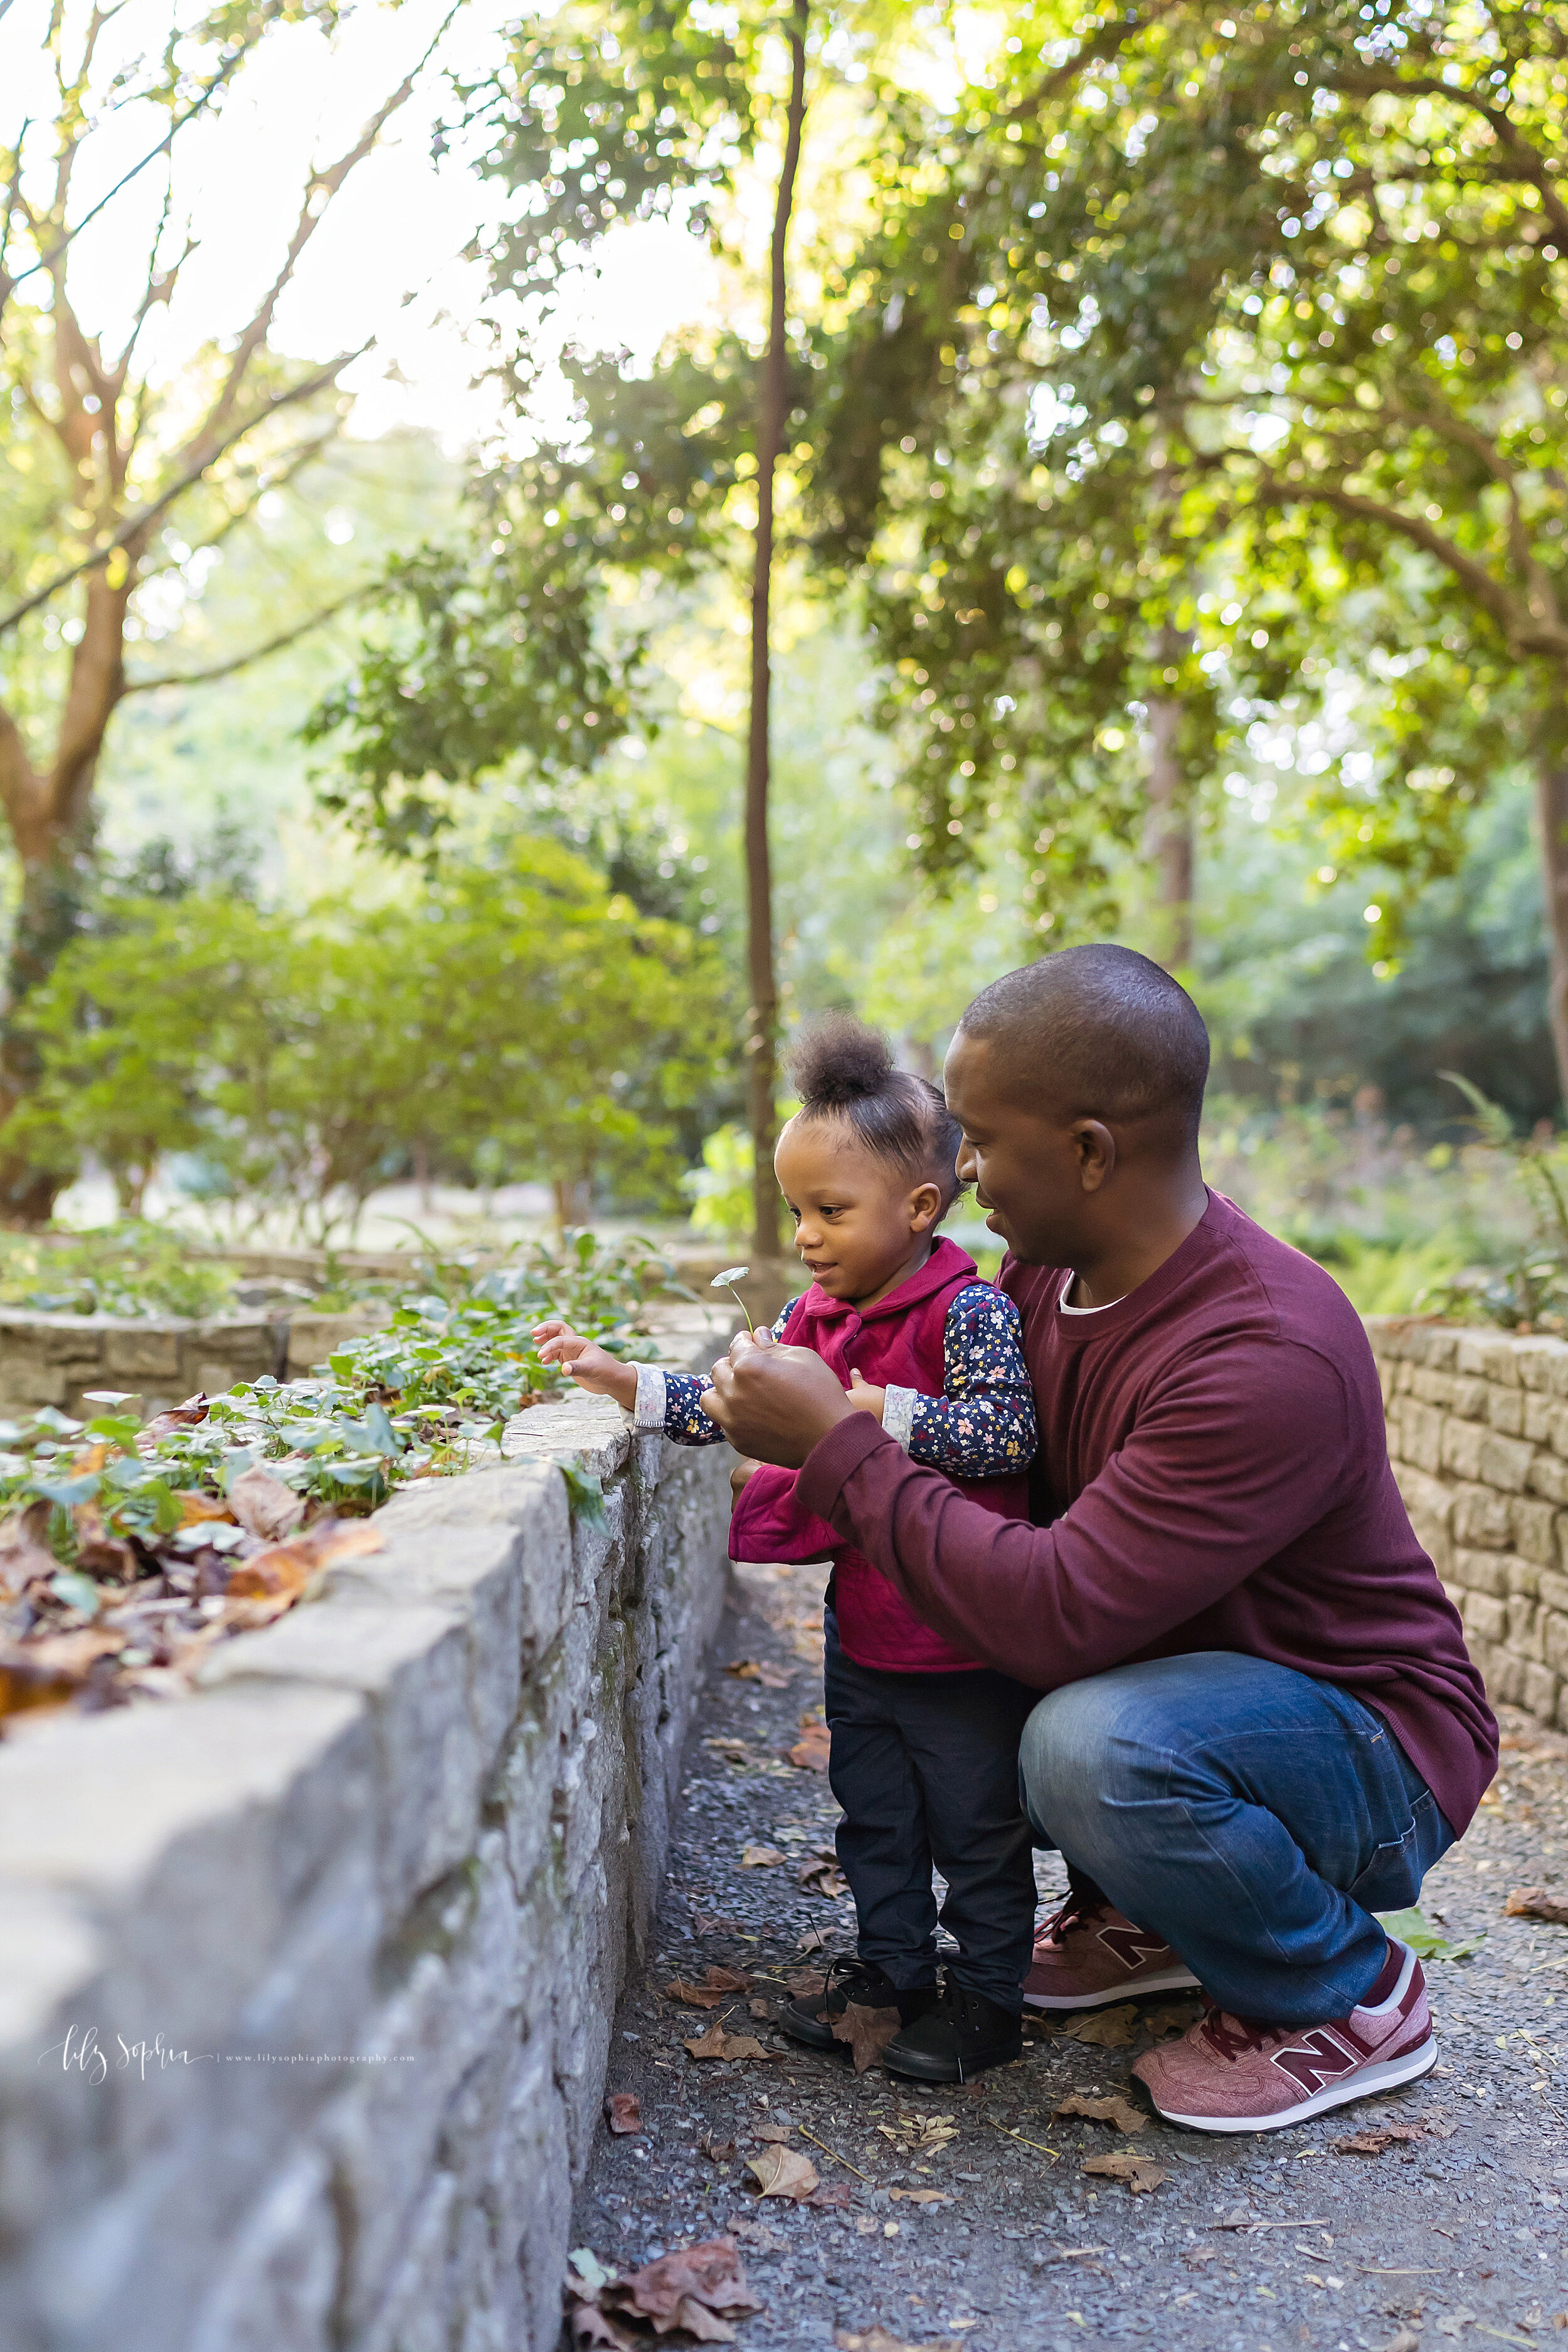  Family photograph of an African-American father as he picks a flower for his daughter along a stone wall in a garden at sunset near Atlanta, Georgia. 